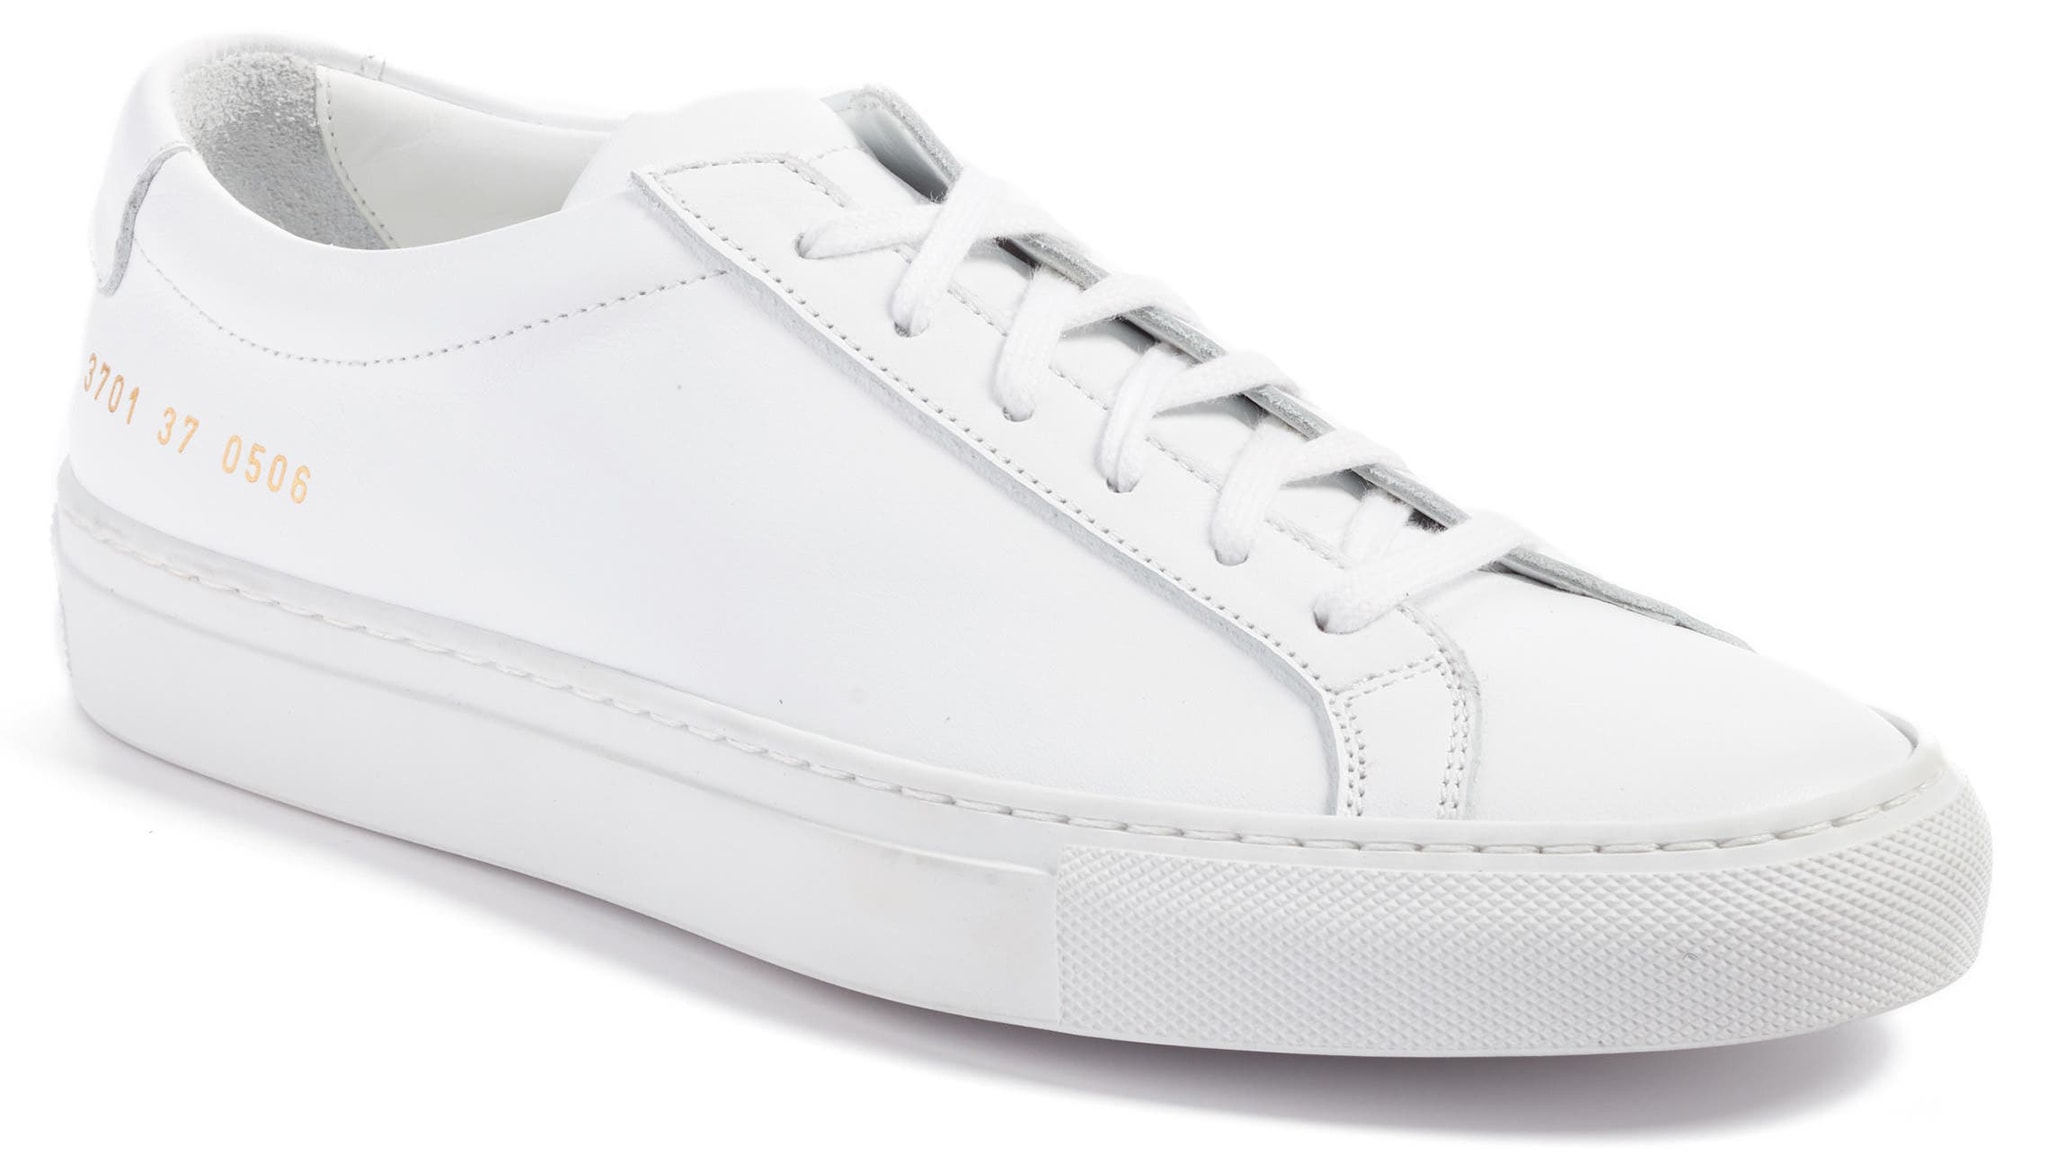 The Original Achilles is a classic white sneaker made from Italian leather stamped with factory ID code and style numbers